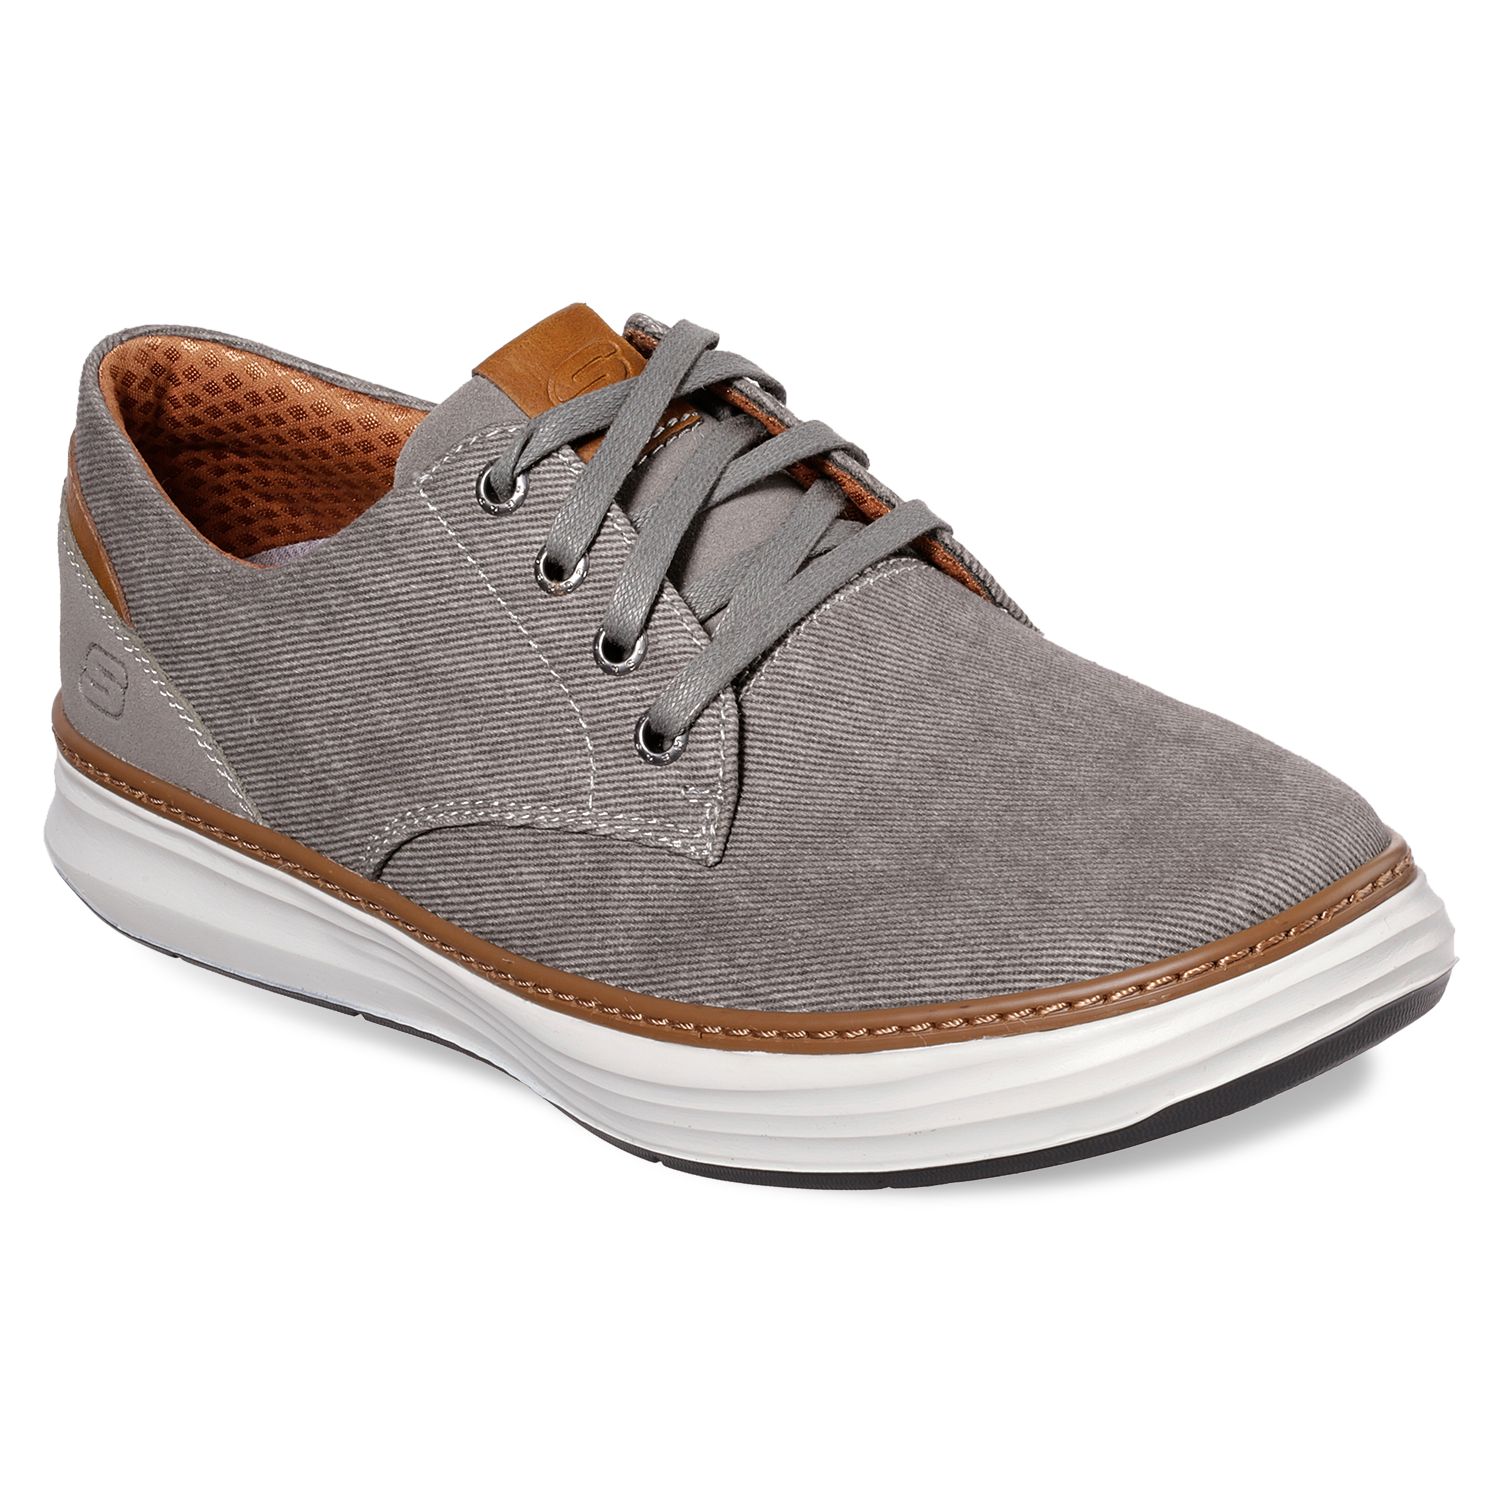 Skechers® Relaxed Fit Moreno - Ederson 